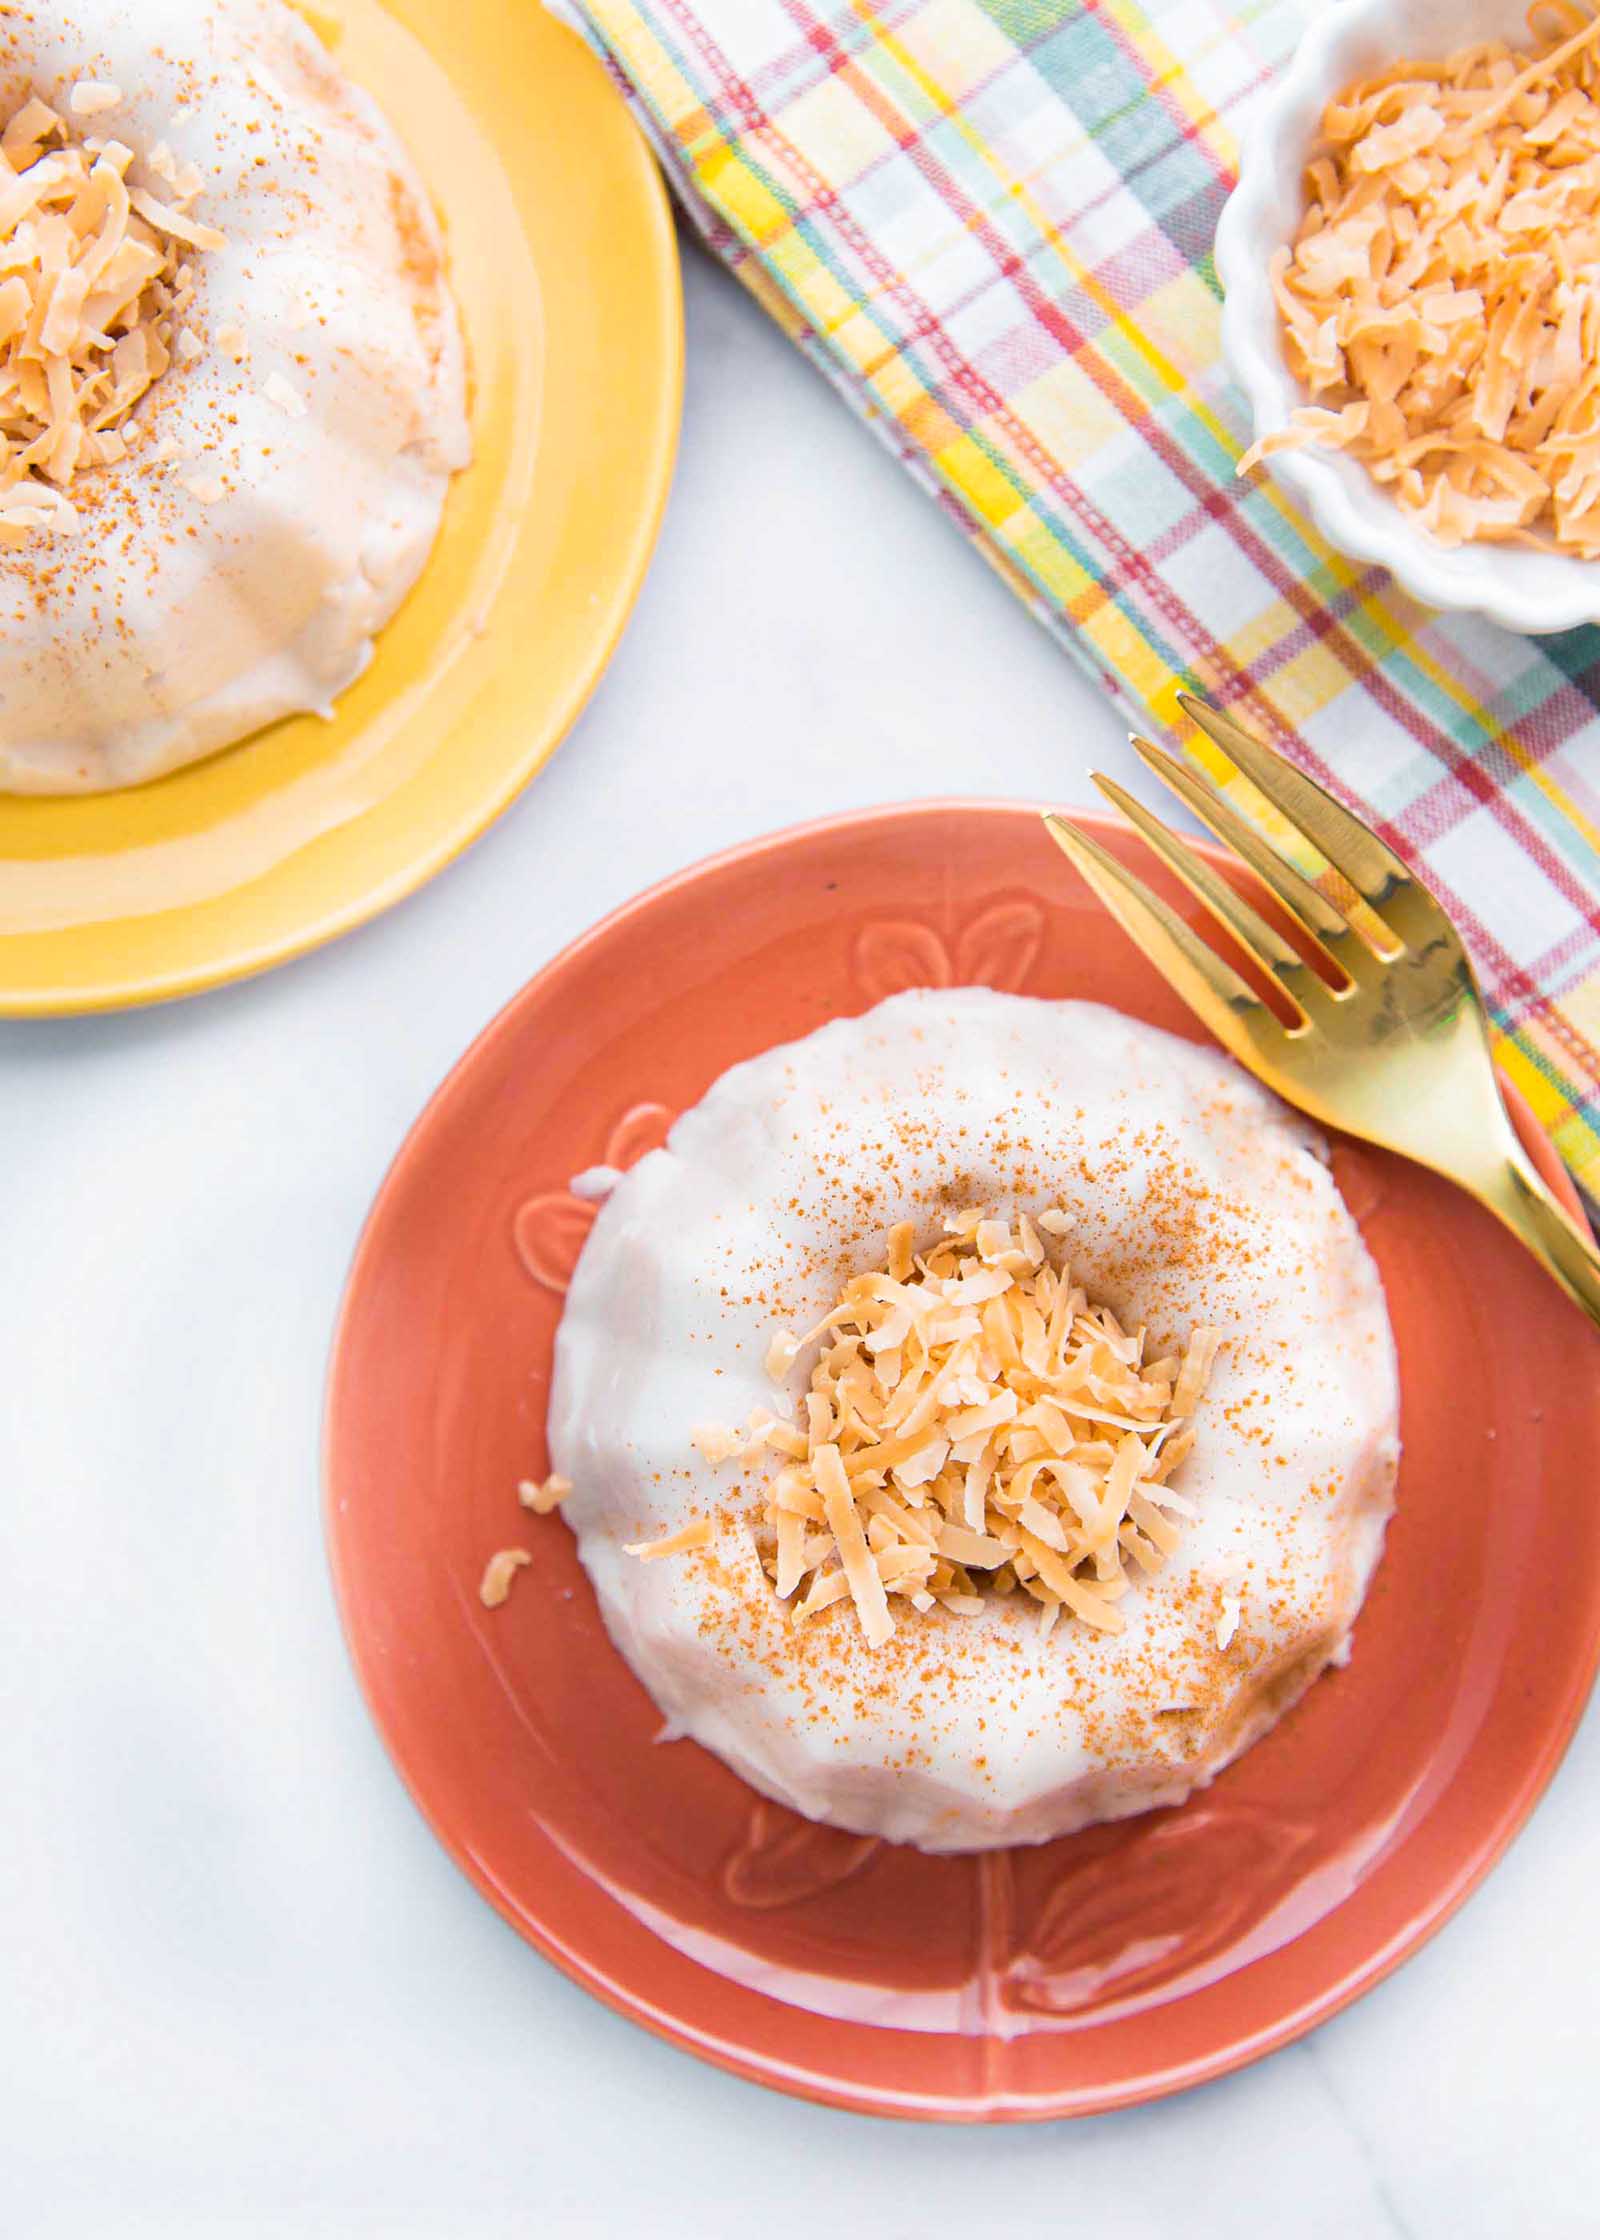 Vertical photo of two plates with coconut pudding with toasted, shredded coconut mounded inside the bundt shape. The coconut pudding is coated in ground cinnamon. The lower plate is coral and a gold fork is to the left of it, the plate in the upper left is light yellow. A small container of toasted shredded coconut is to the right of the coral plate. A striped dish cloth is underneath the coconut.